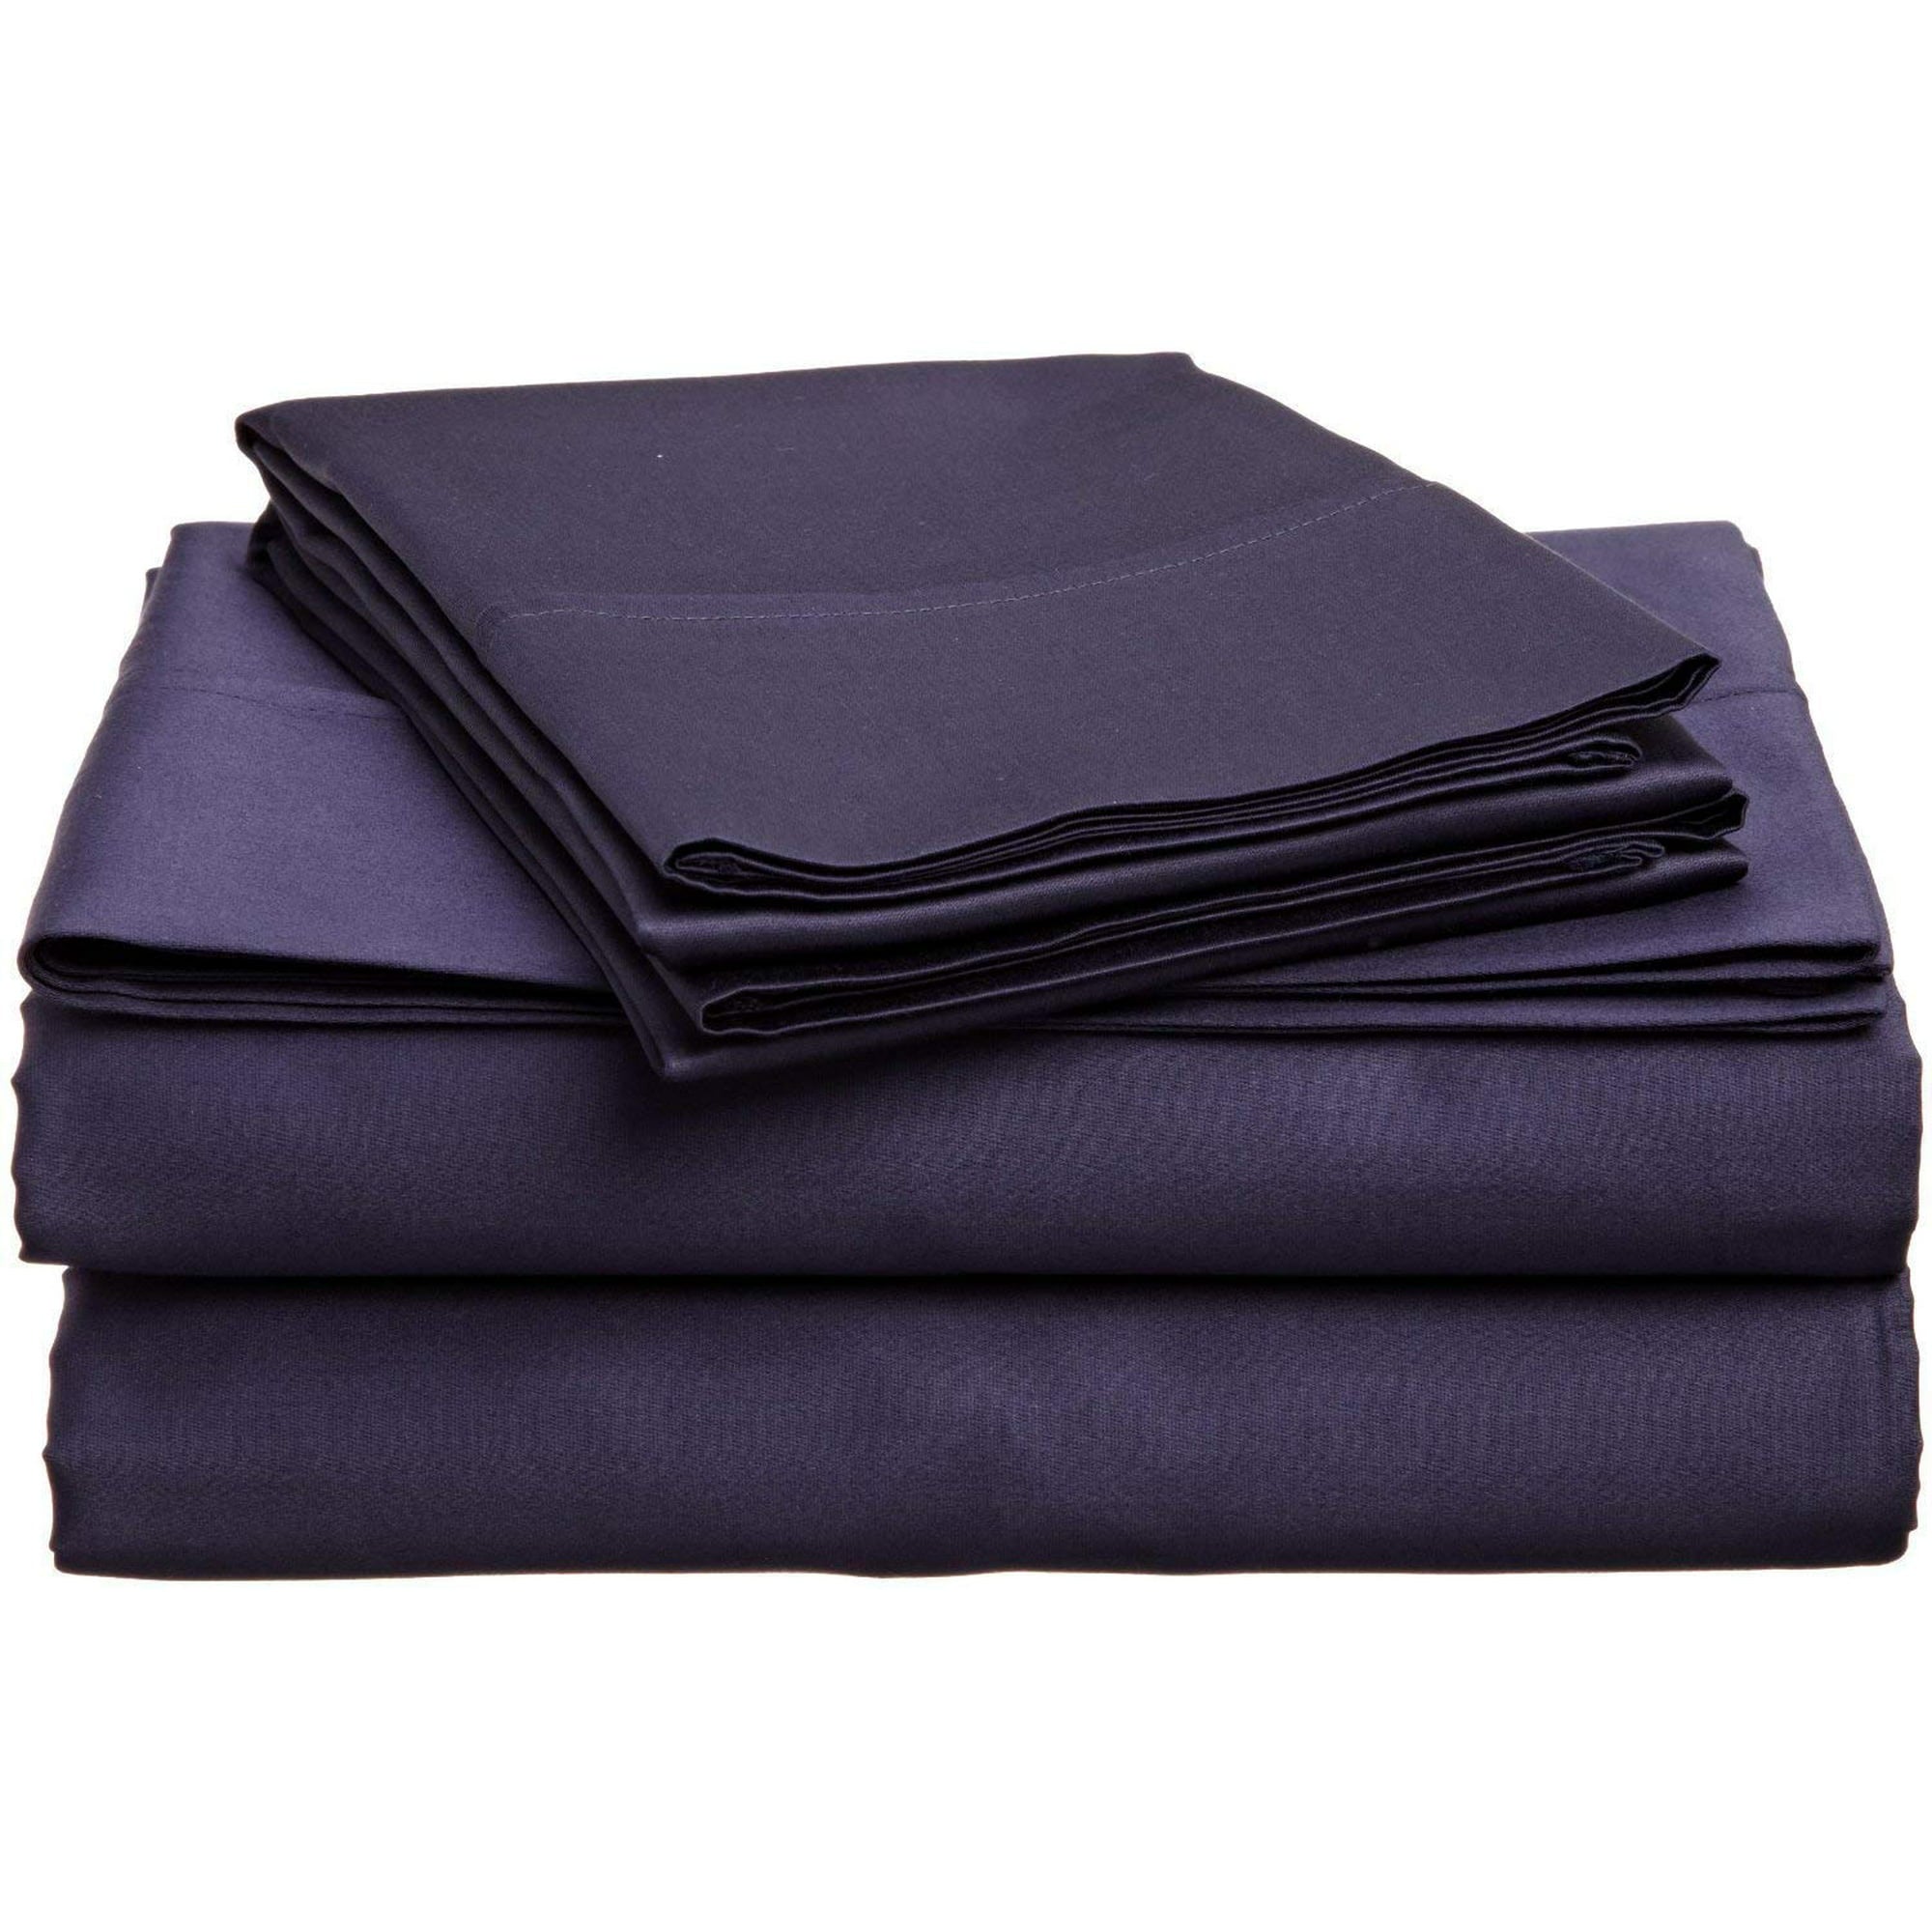 600 Thread Count Sleeper Sofa Bed Sheet Set - Egyptian Cotton 4-PCs Queen Sofa Navy Blue Solid Fit Up To 8" inches Deep Pocket